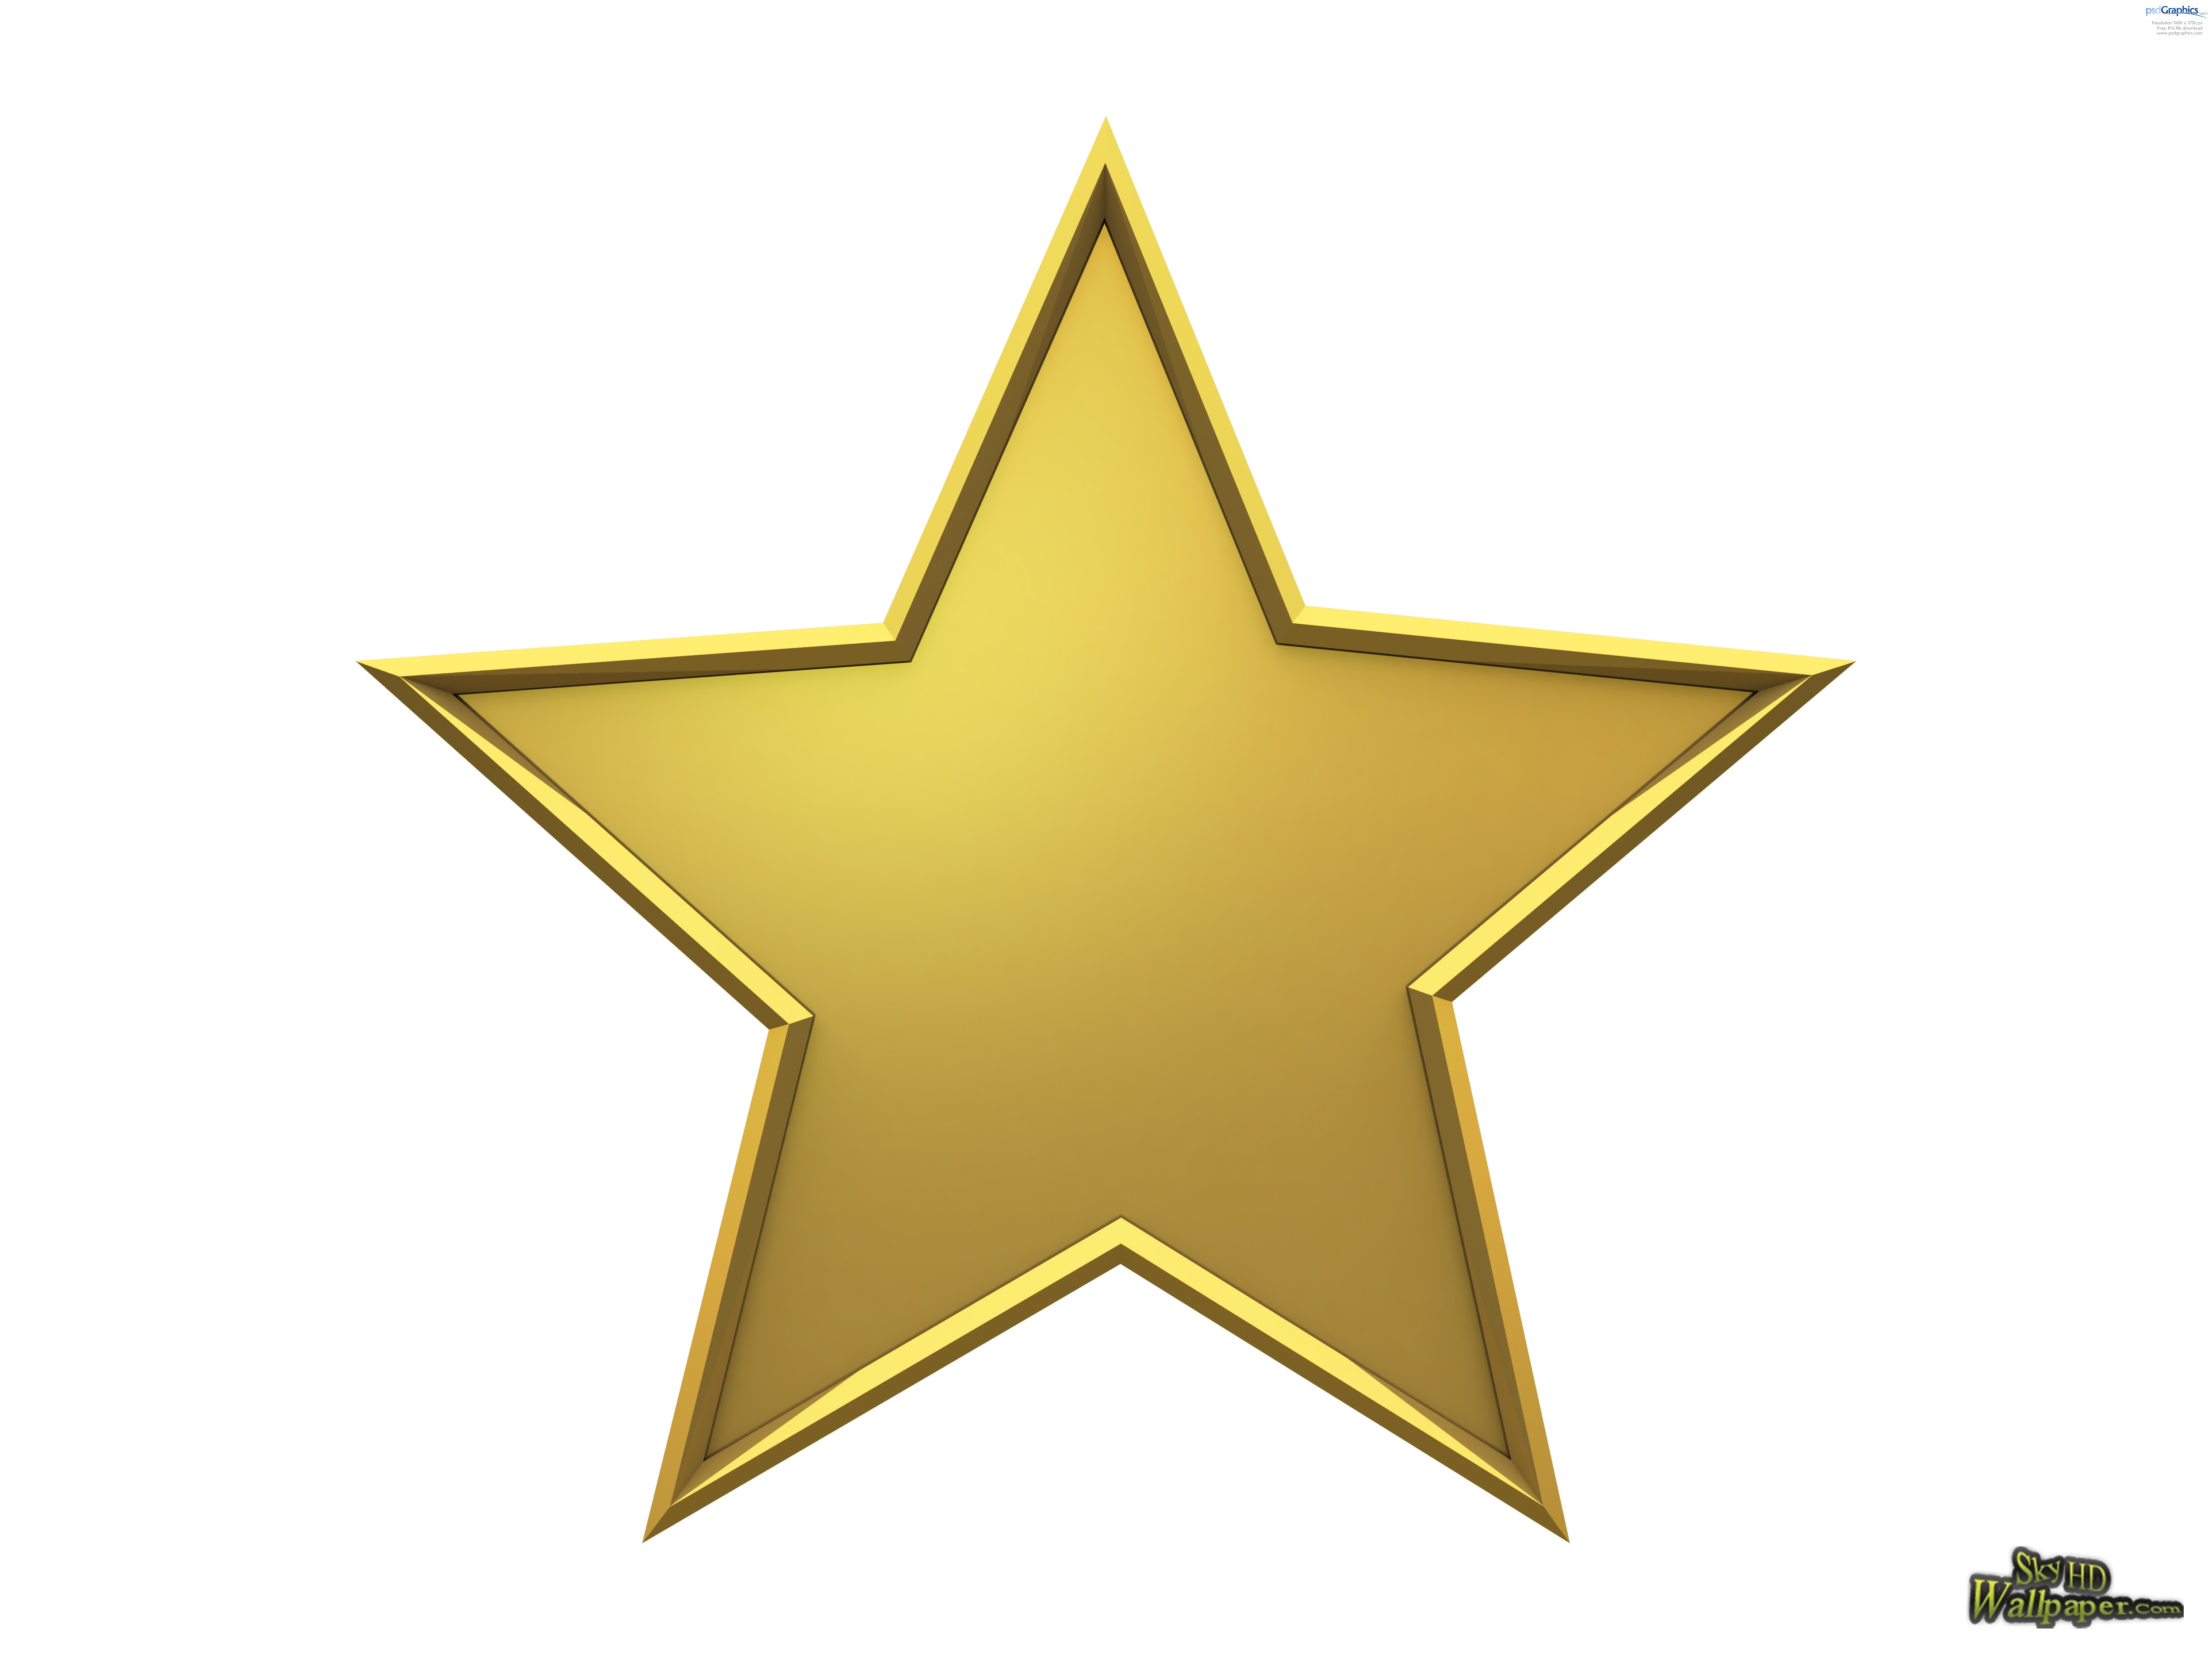 gold star wallpaper,yellow,star,symbol,astronomical object,symmetry